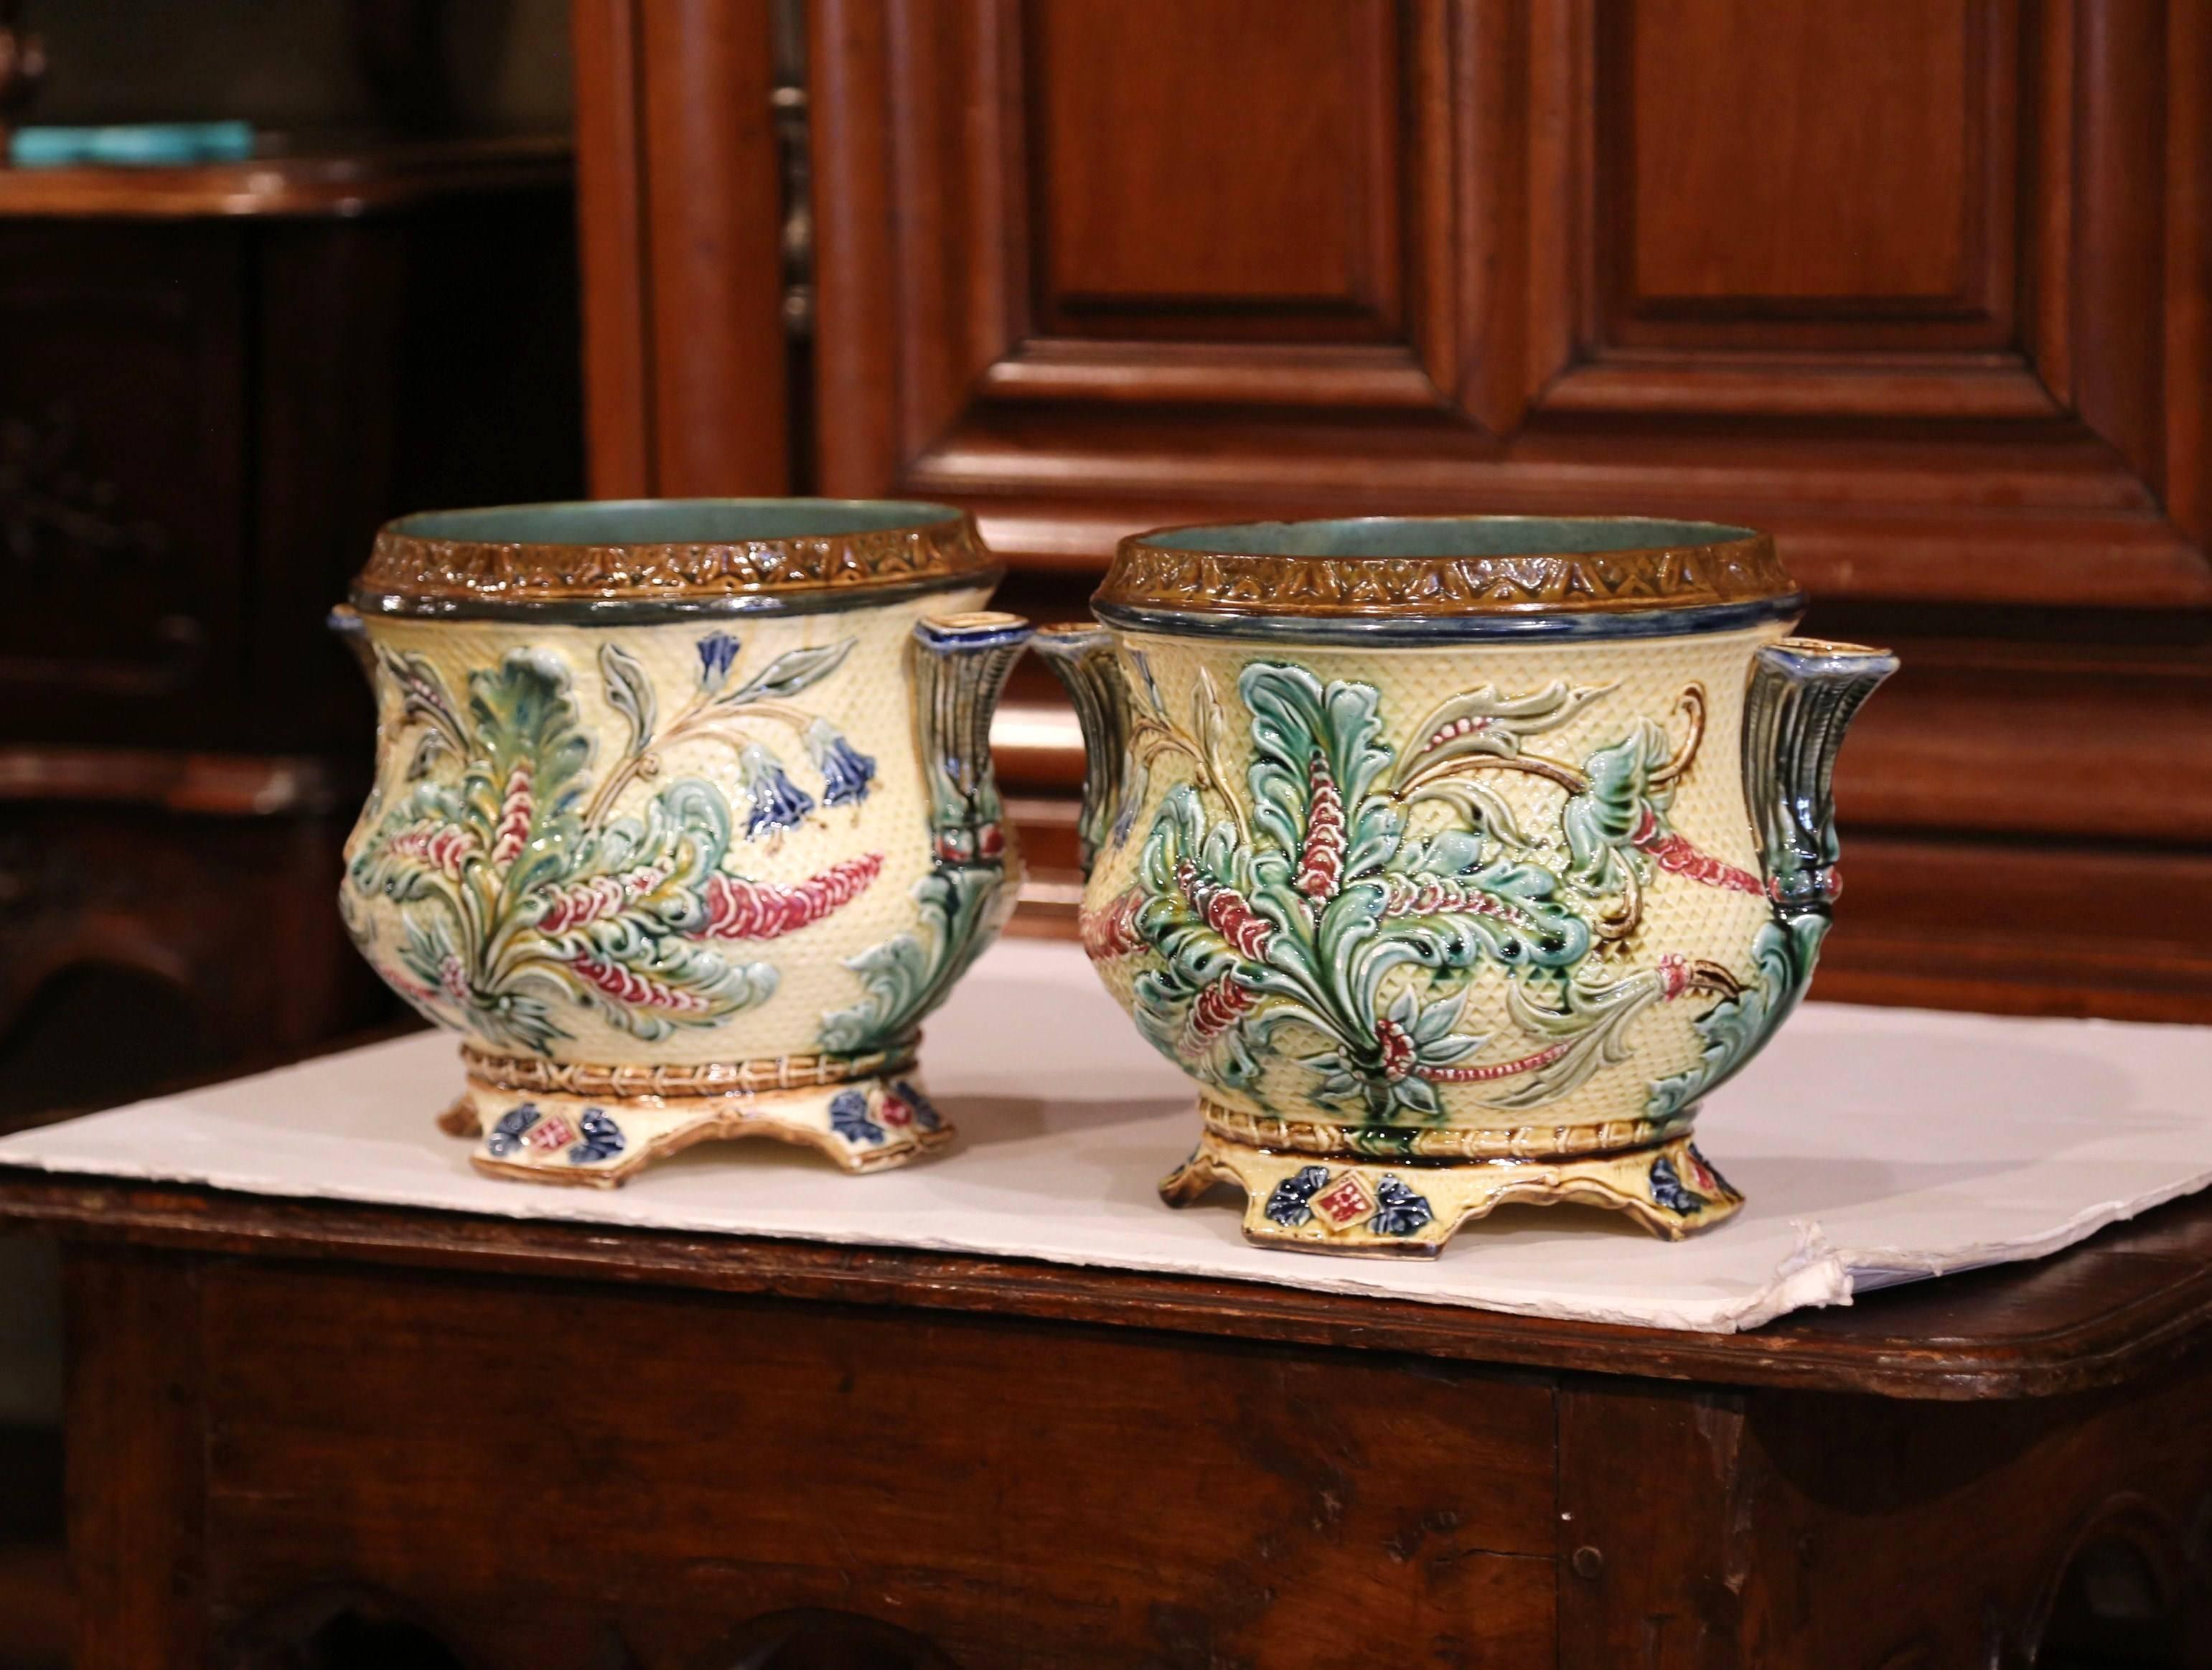 Decorate your mantel with this nice pair of hand-painted, Majolica planters from France, circa 1880. Both antique vases have flower shaped handles on the sides, and feature colorful leaves and floral motifs in a beige, green and pink palette and